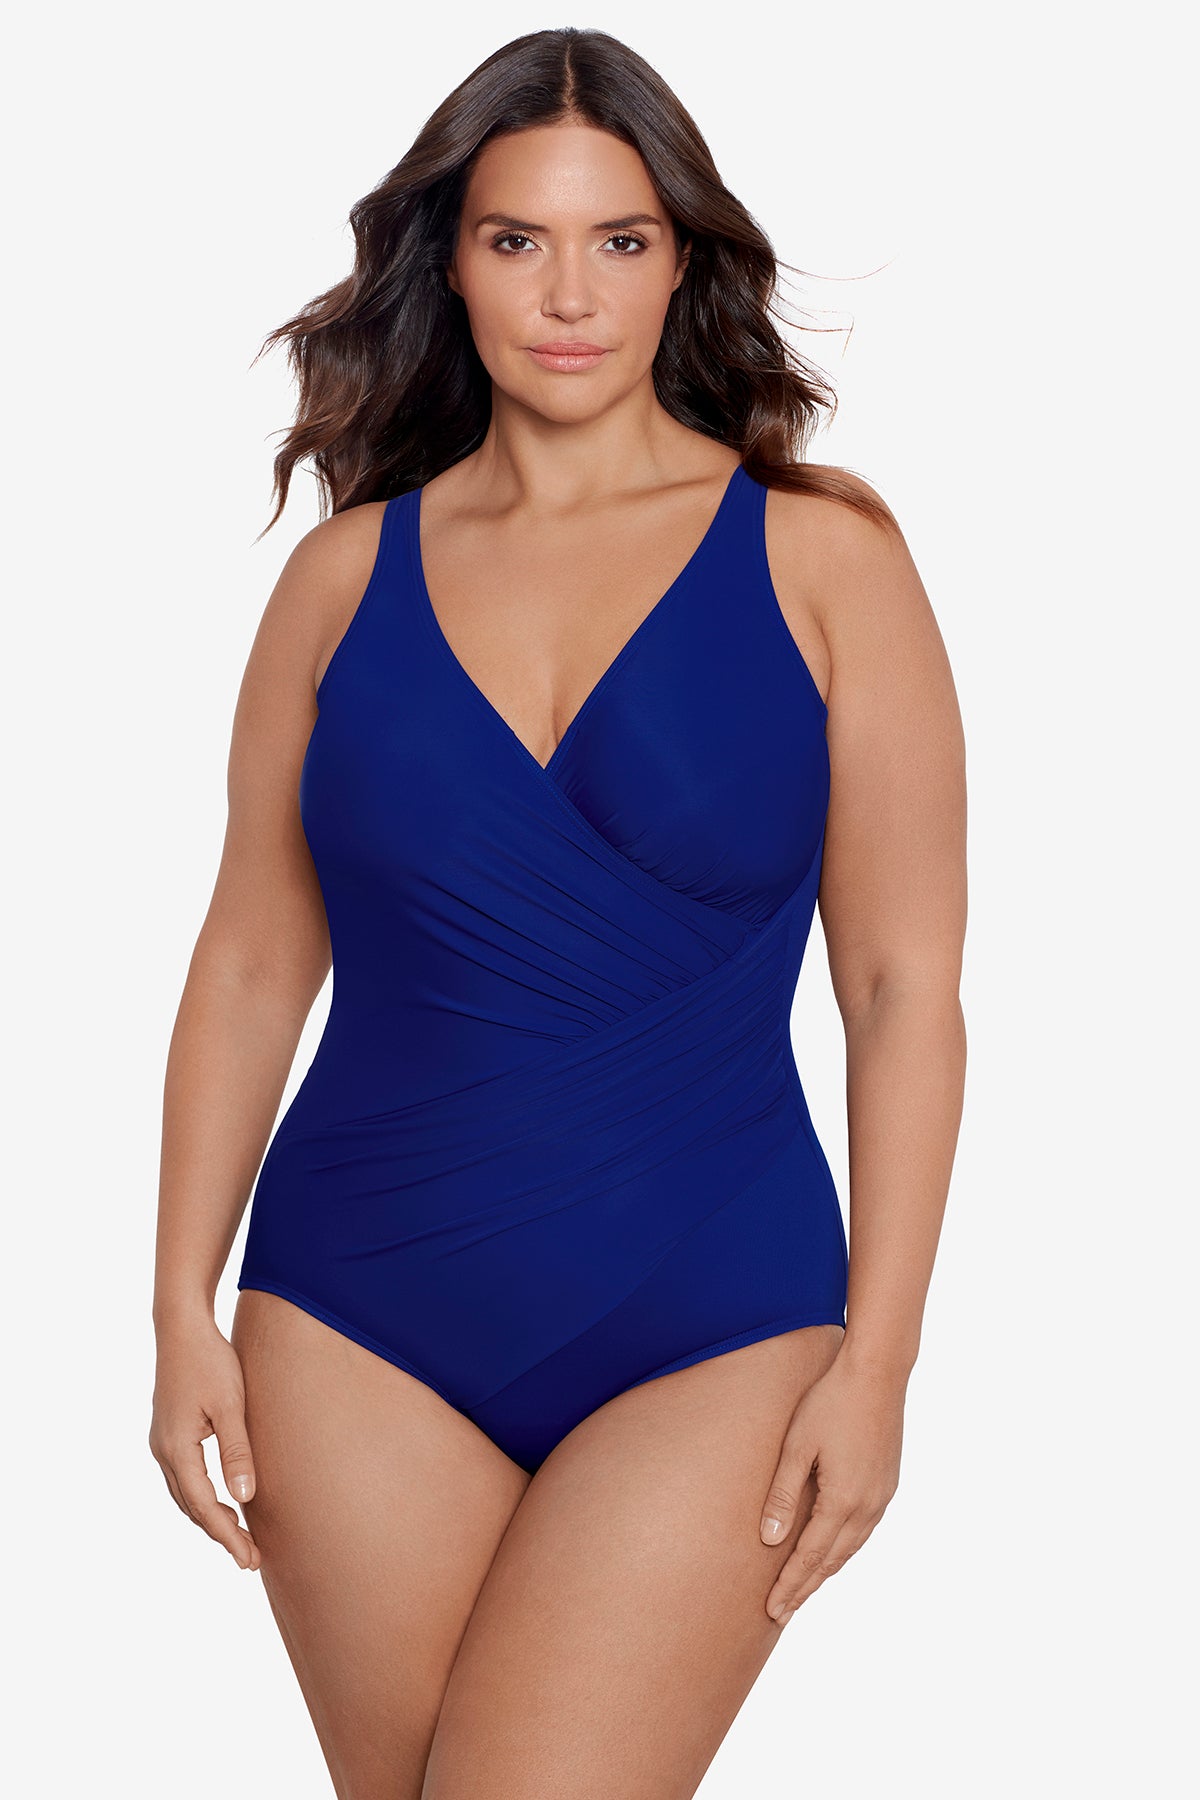 3X Shapewear by Miraclesuit